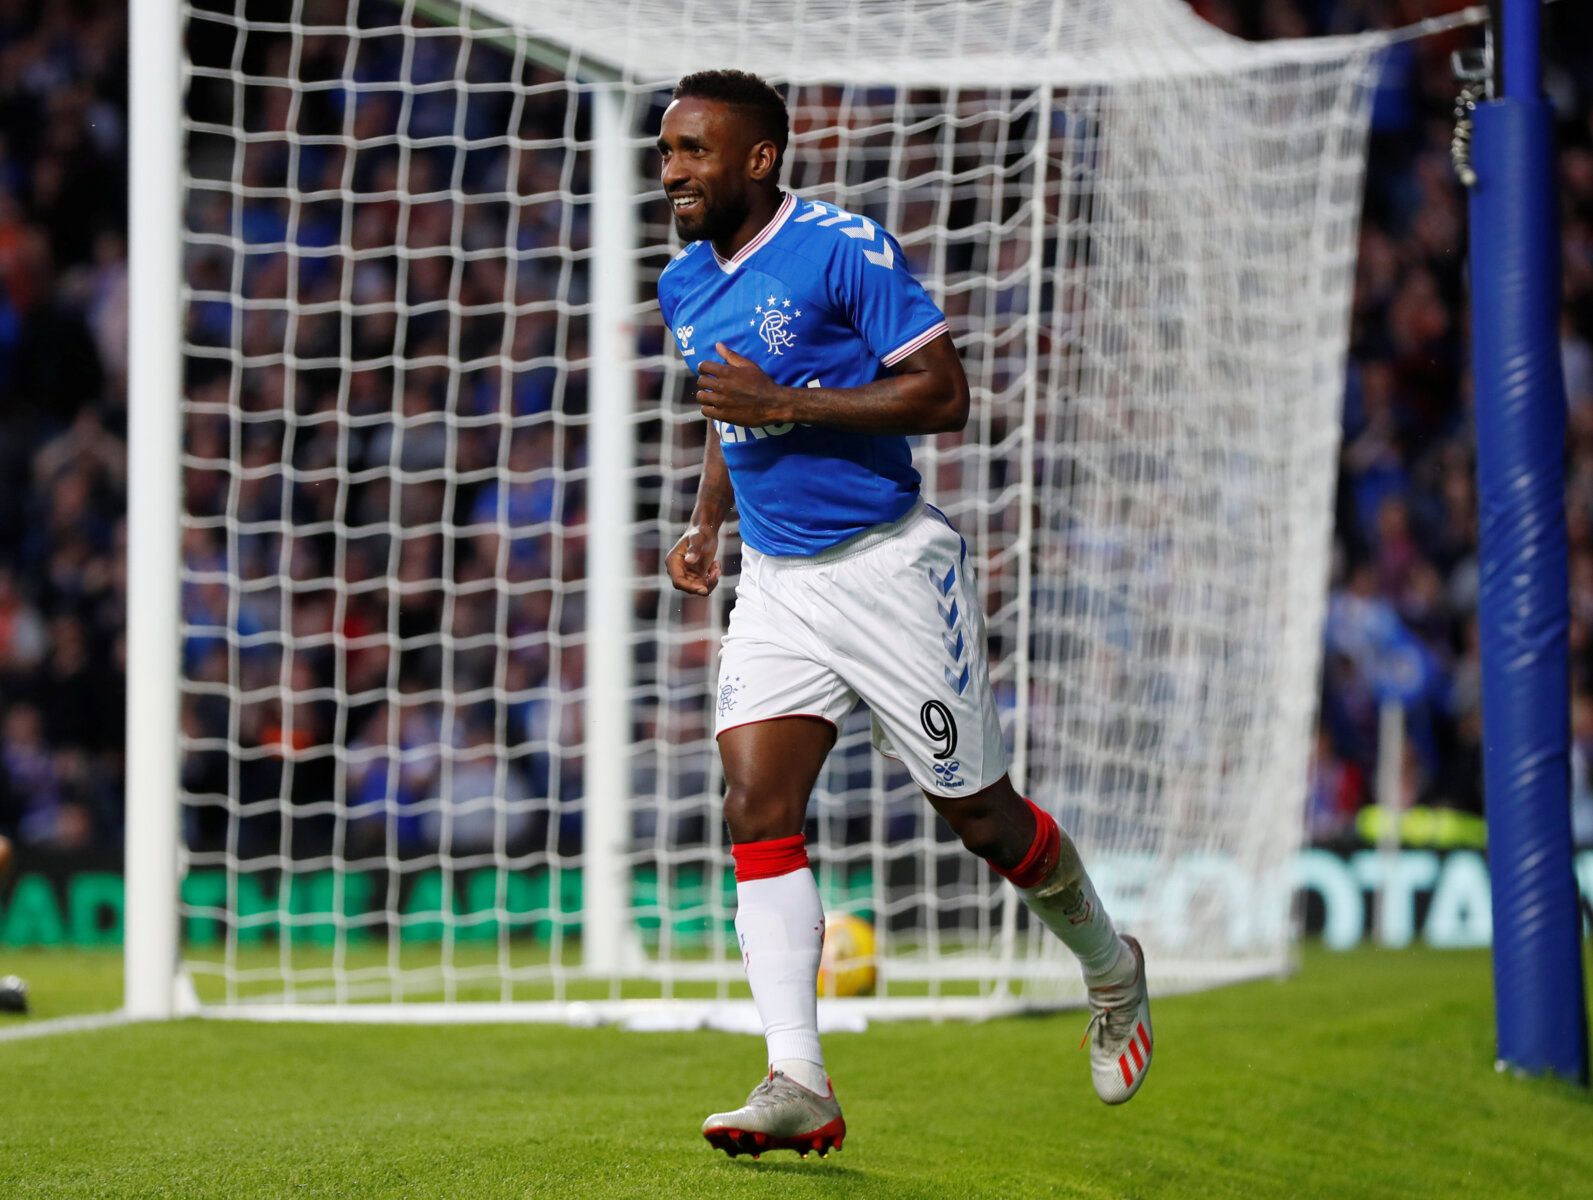 Soccer Football - First Qualifying Round Second Leg - Rangers v St Joseph's - Ibrox, Glasgow, Britain - July 18, 2019   Rangers' Jermain Defoe celebrates scoring their fifth goal        Action Images via Reuters/Lee Smith